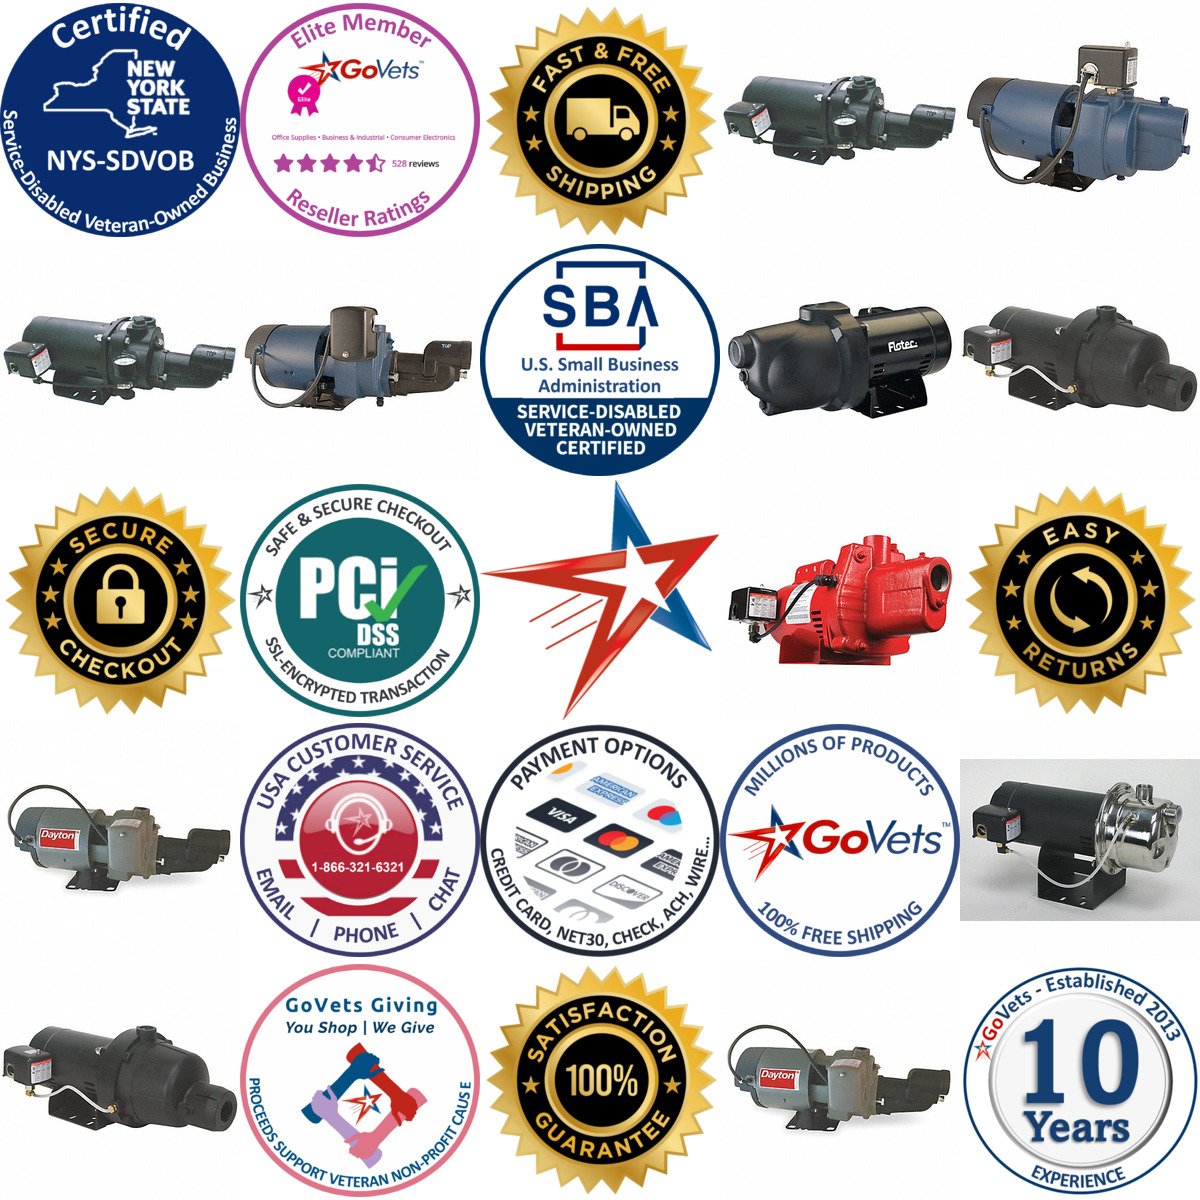 A selection of Shallow Well Jet Pumps products on GoVets